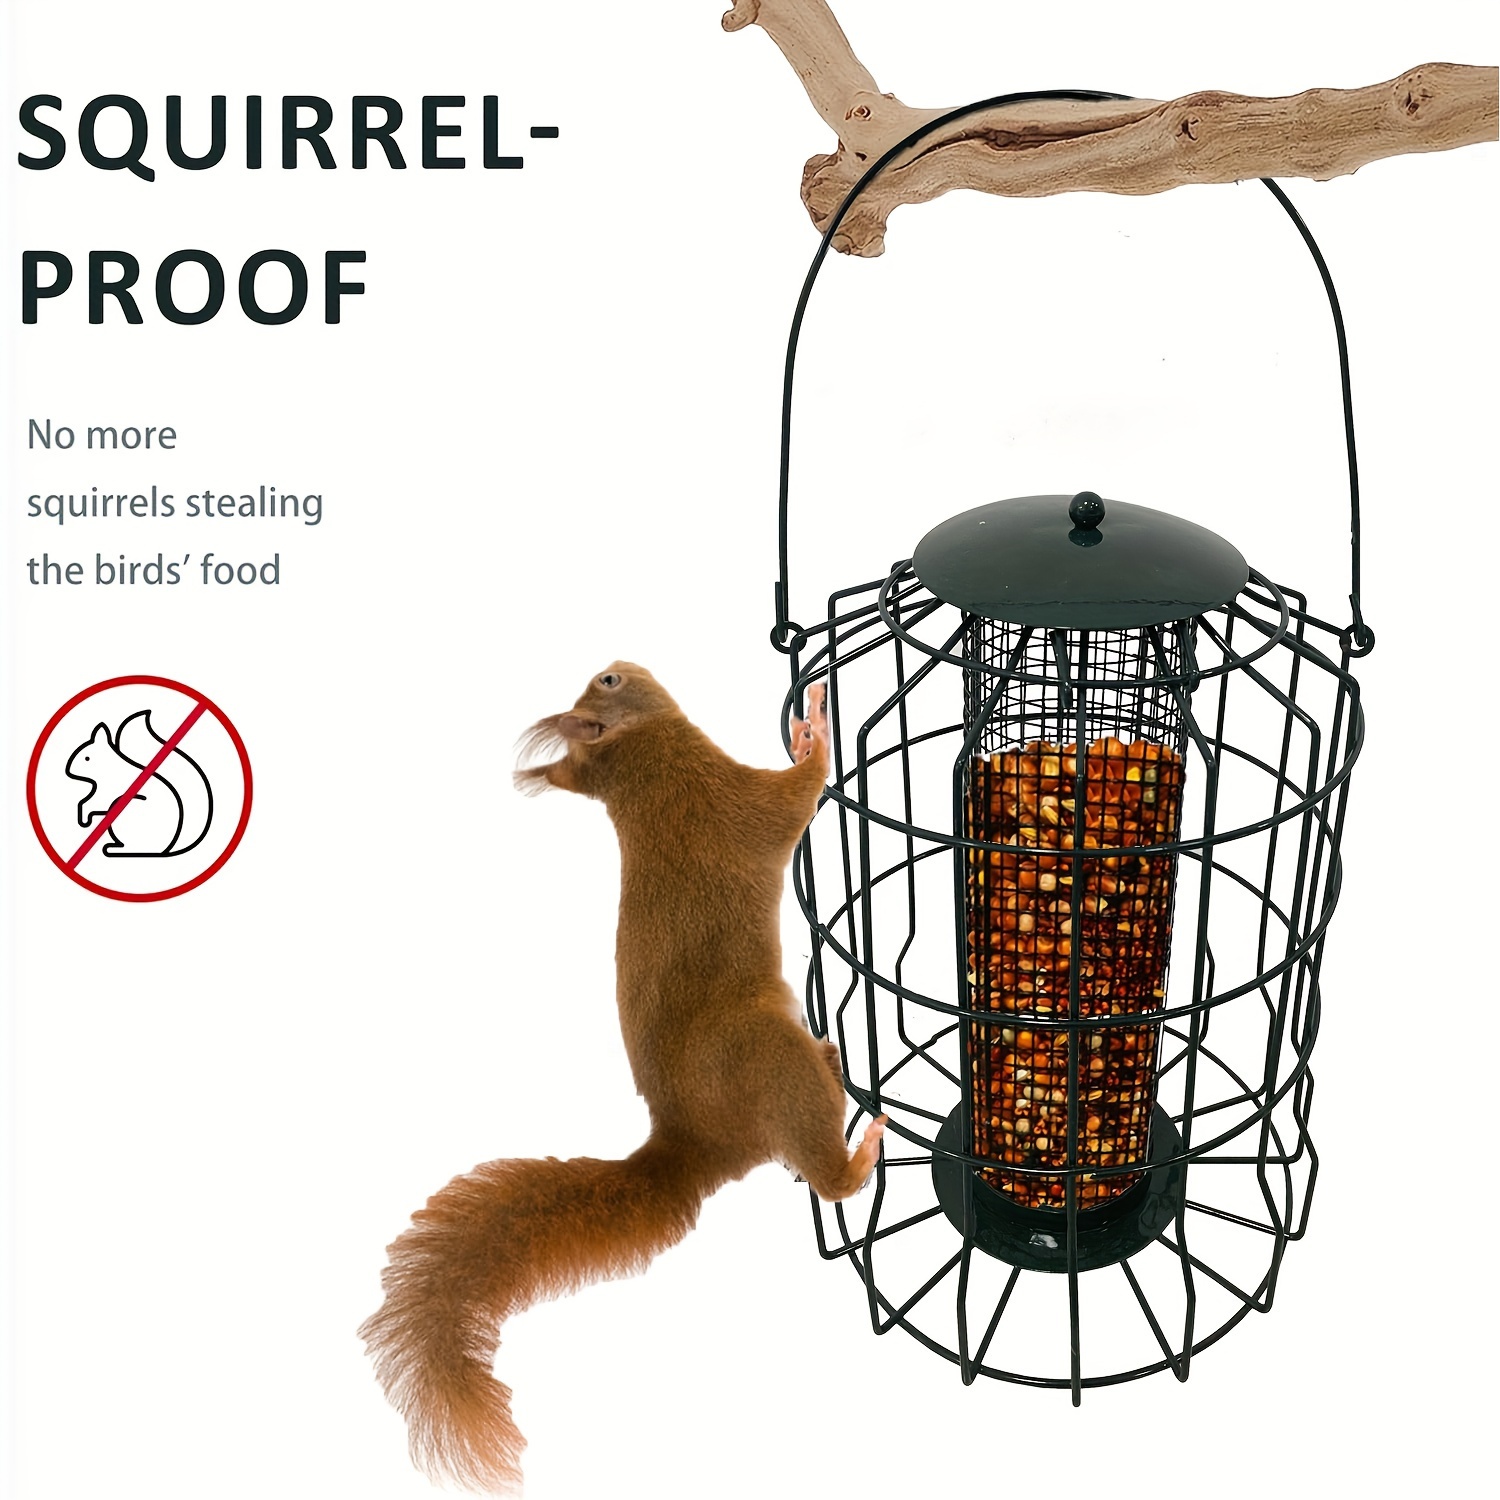 

1pc Squirrel-proof Wild Bird Feeder, All-metal Hanging Outdoor Birdfeeder With Porous Feeding Ports, Chew & Rust Proof, Attracts Small Birds